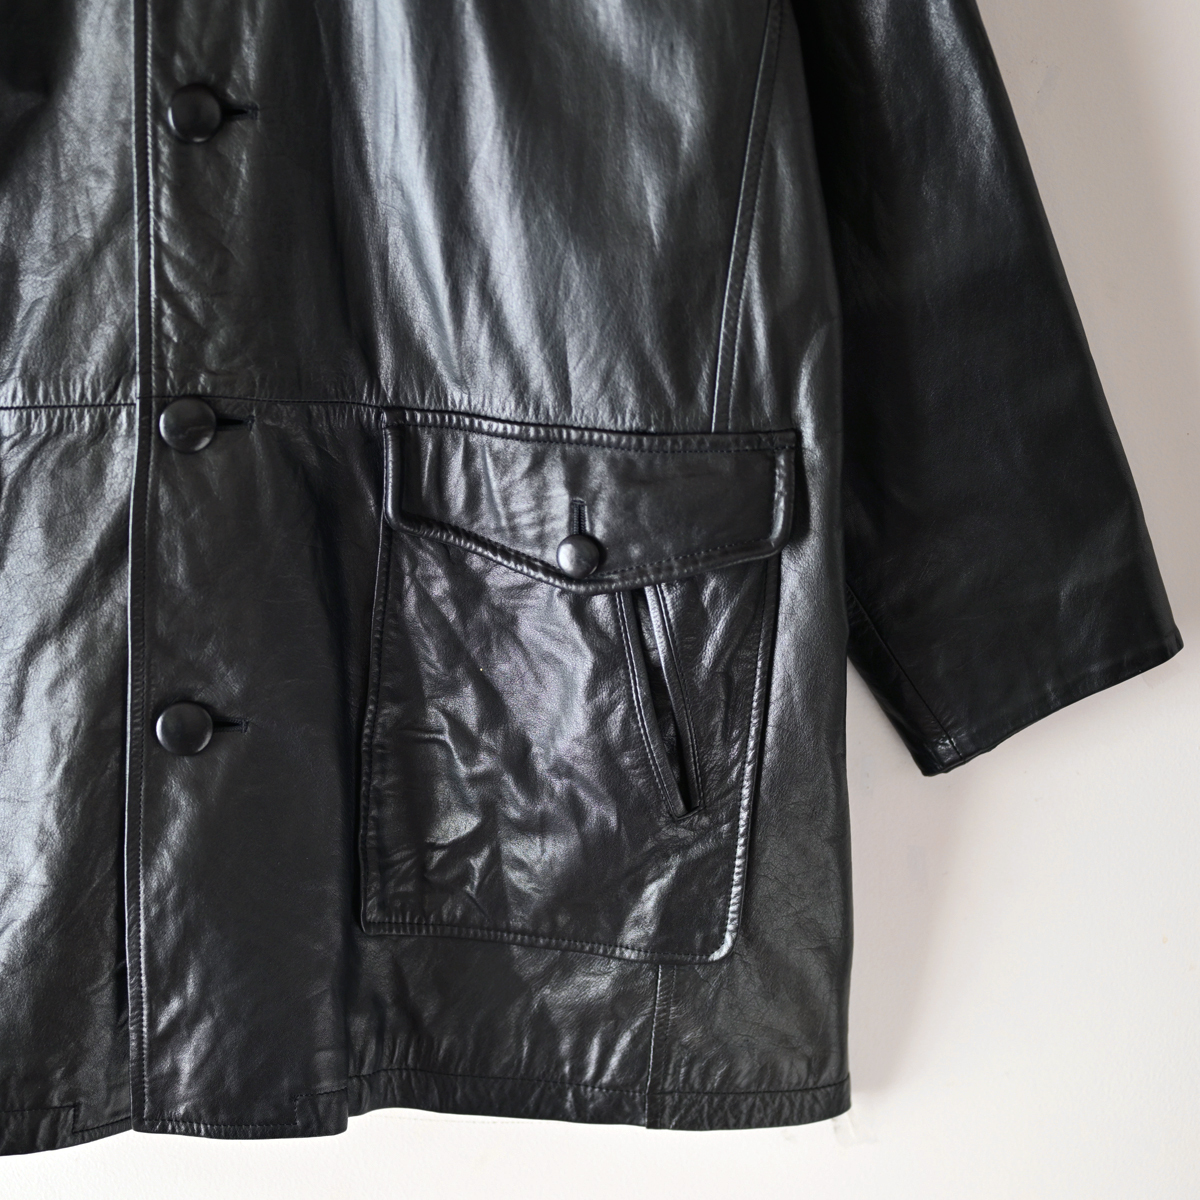 90skau leather car coat black black free size / Vintage 80s USA American Casual original leather coverall jacket 